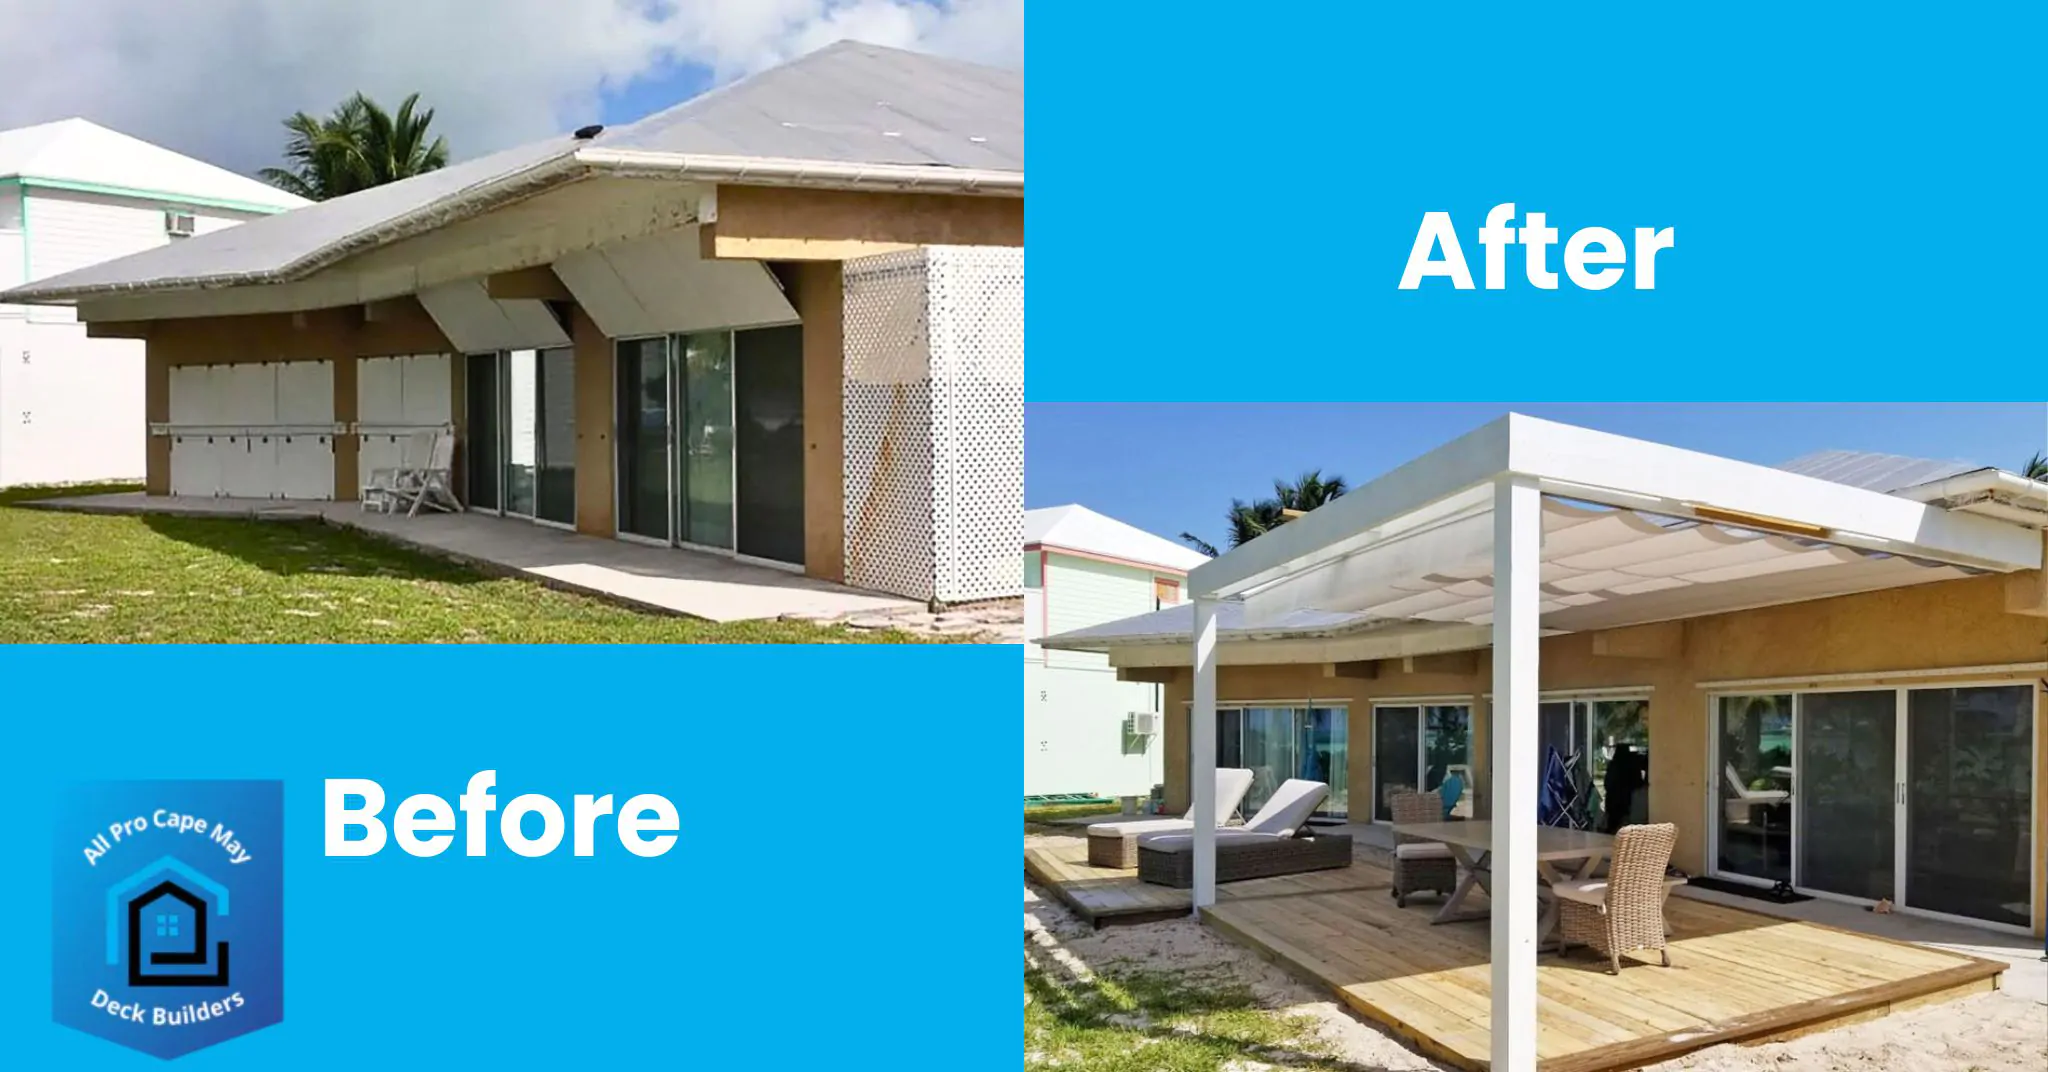 Before and After Shade Structures Installation Service - All Pro Cape May Deck Builders